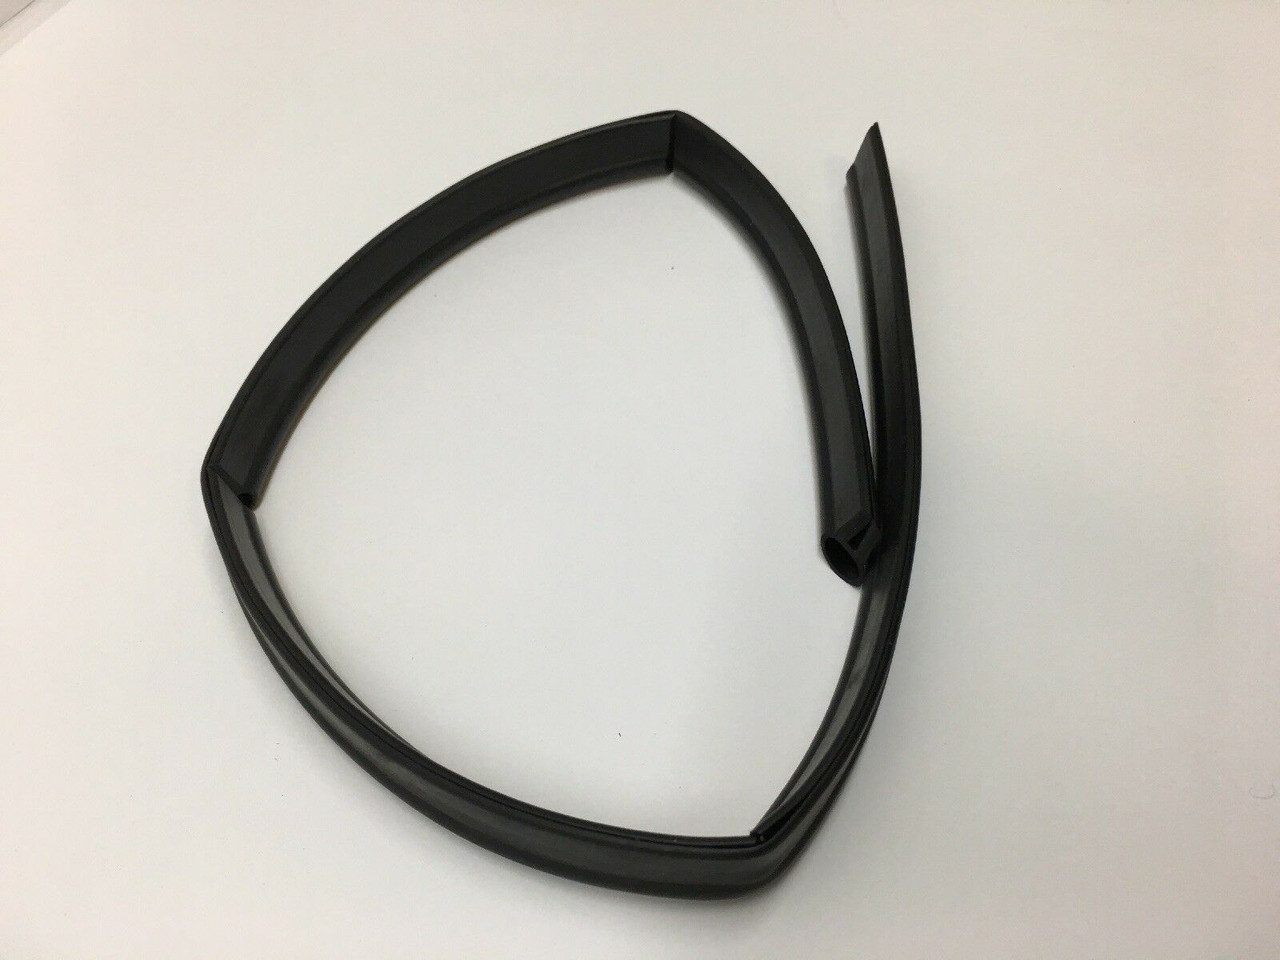 Nonmetallic Special Shaped Seal 12364428-2 Rubber